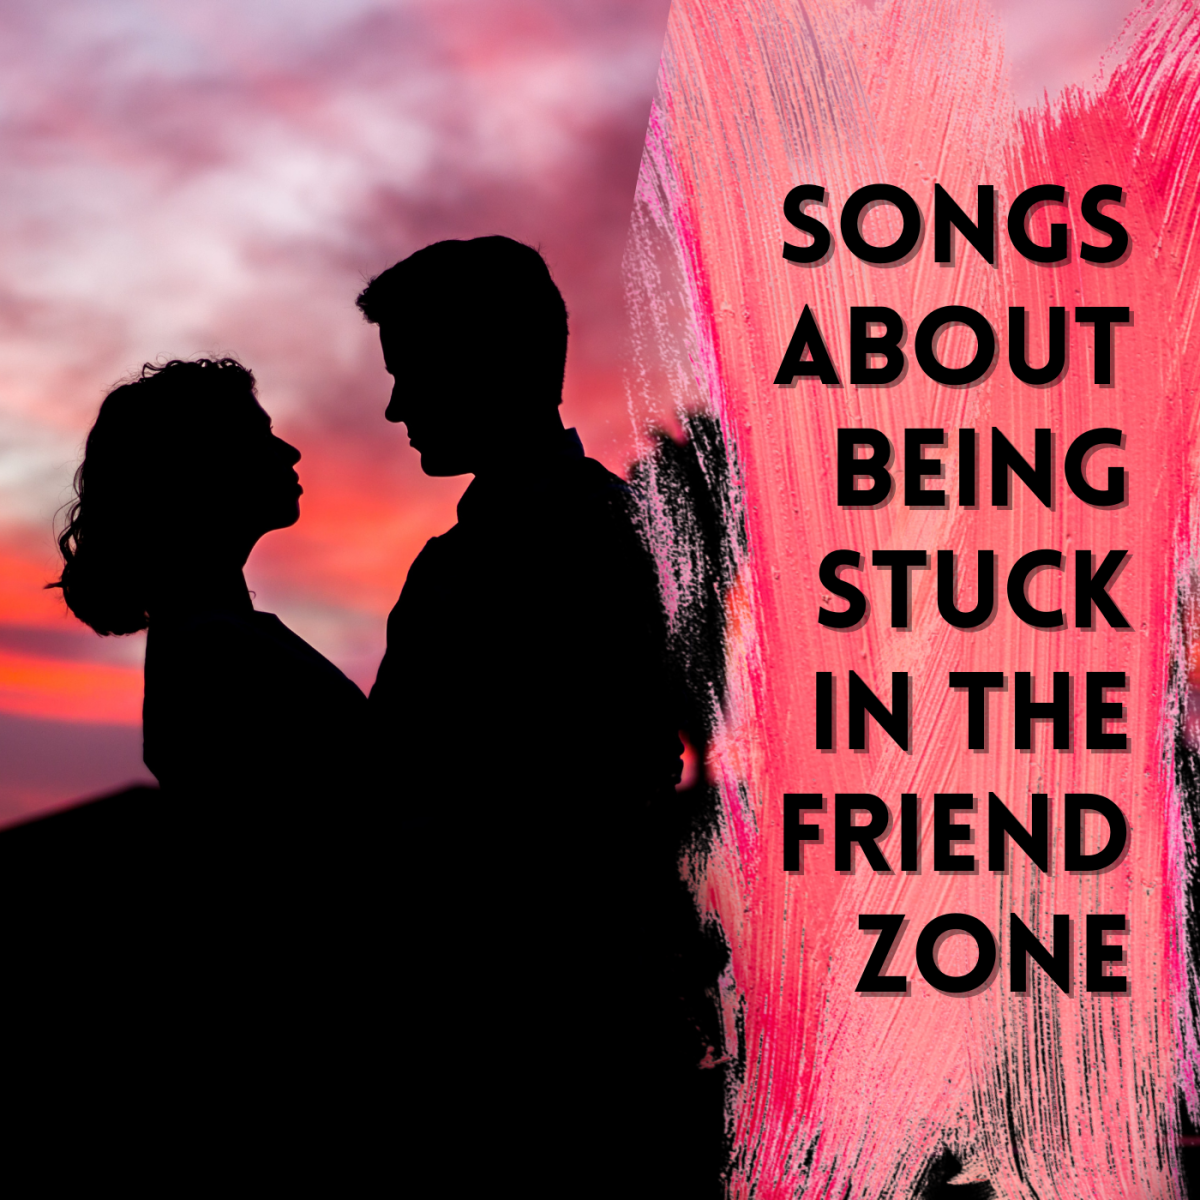 Songs about being stuck in the friend zone